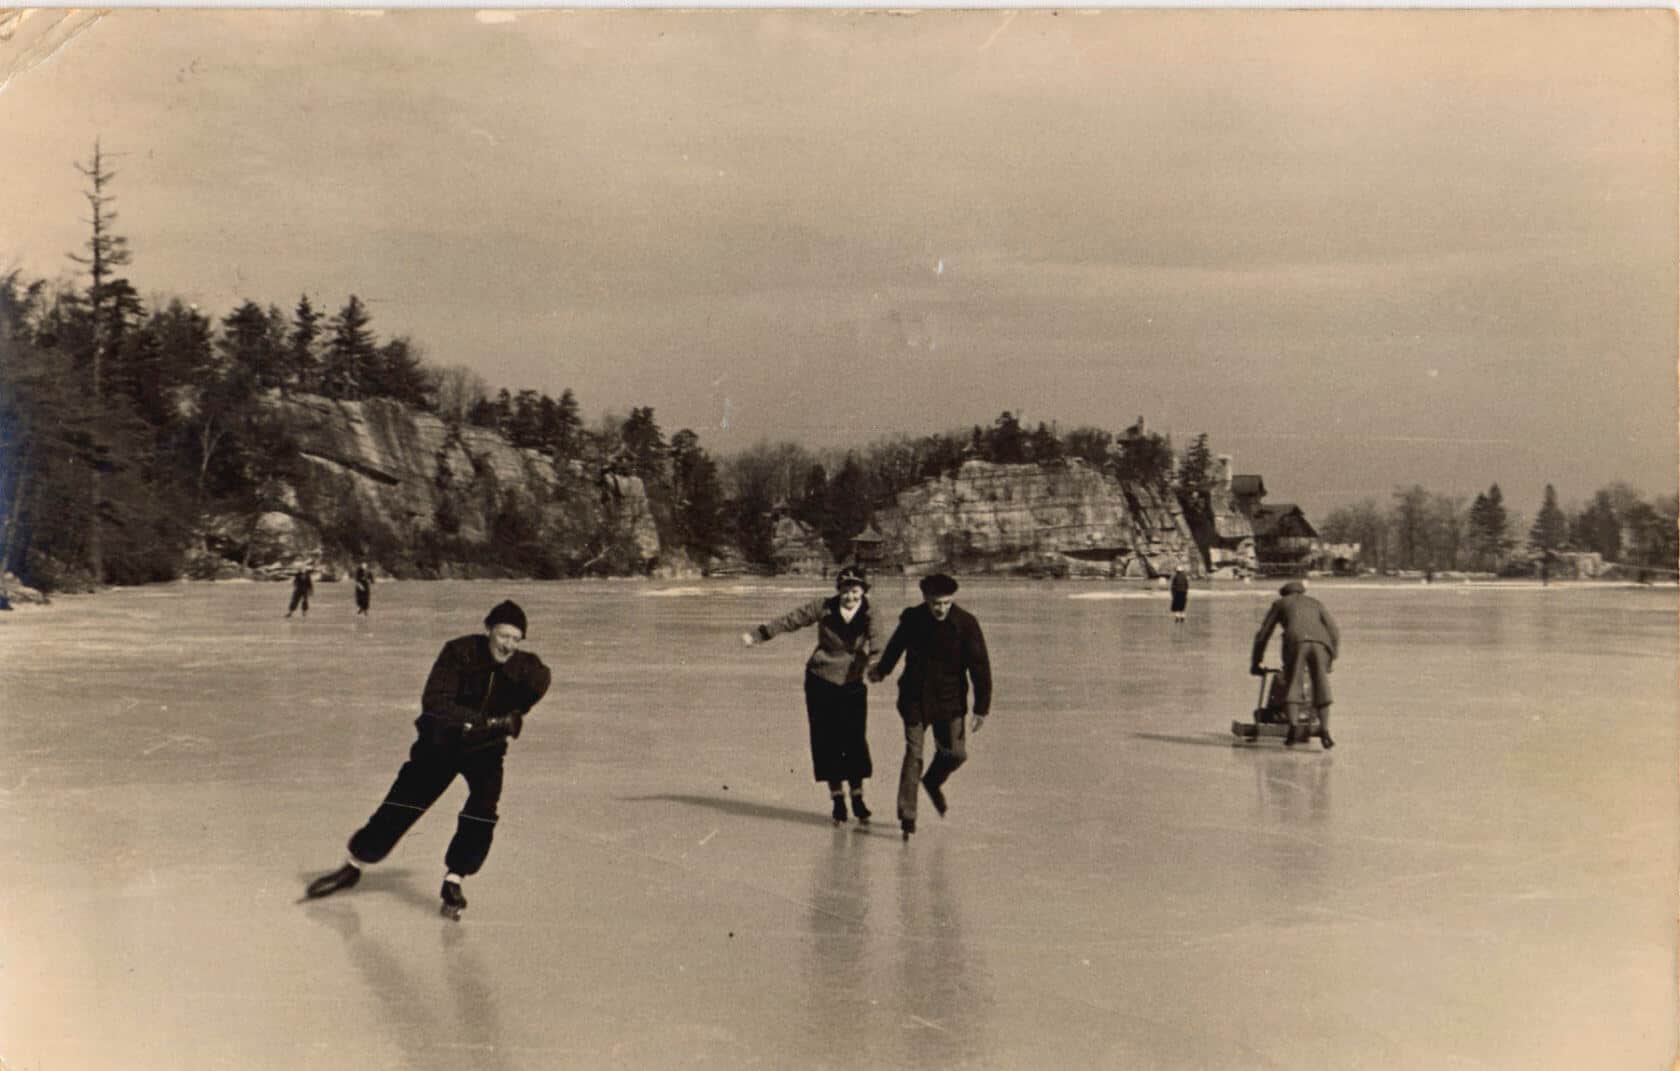 Ice Skating on the Lake in 1938